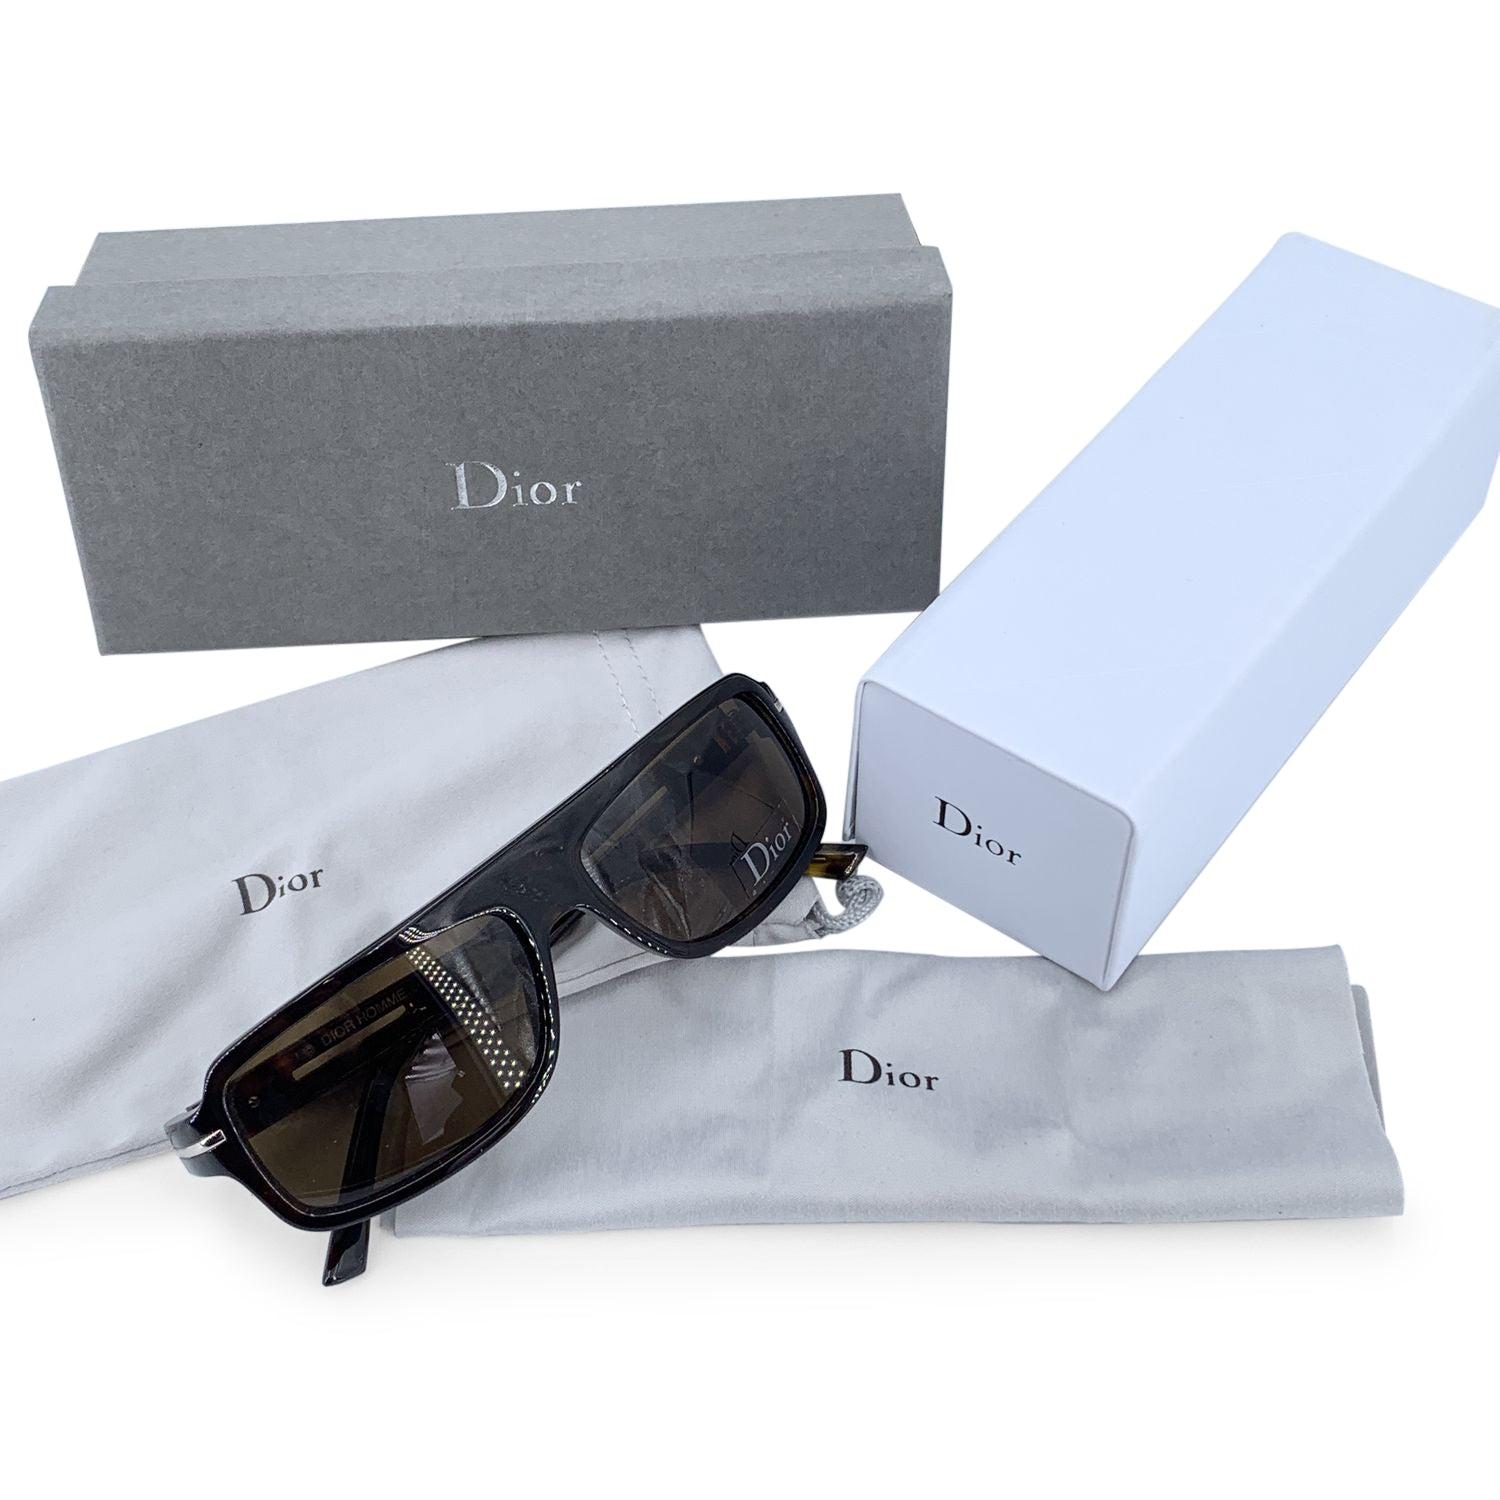 CHRISTIAN DIOR HOMME 'Black Tie' Sunglasses,mod. 70/S - 086EC. Size 56/15 - 135mm. Dark brown acetate frame, sides with silver metal accents on ear stems. 100% Total UVA/UVB protection brown lenses. Made in Italy. Details MATERIAL: Plastic COLOR: